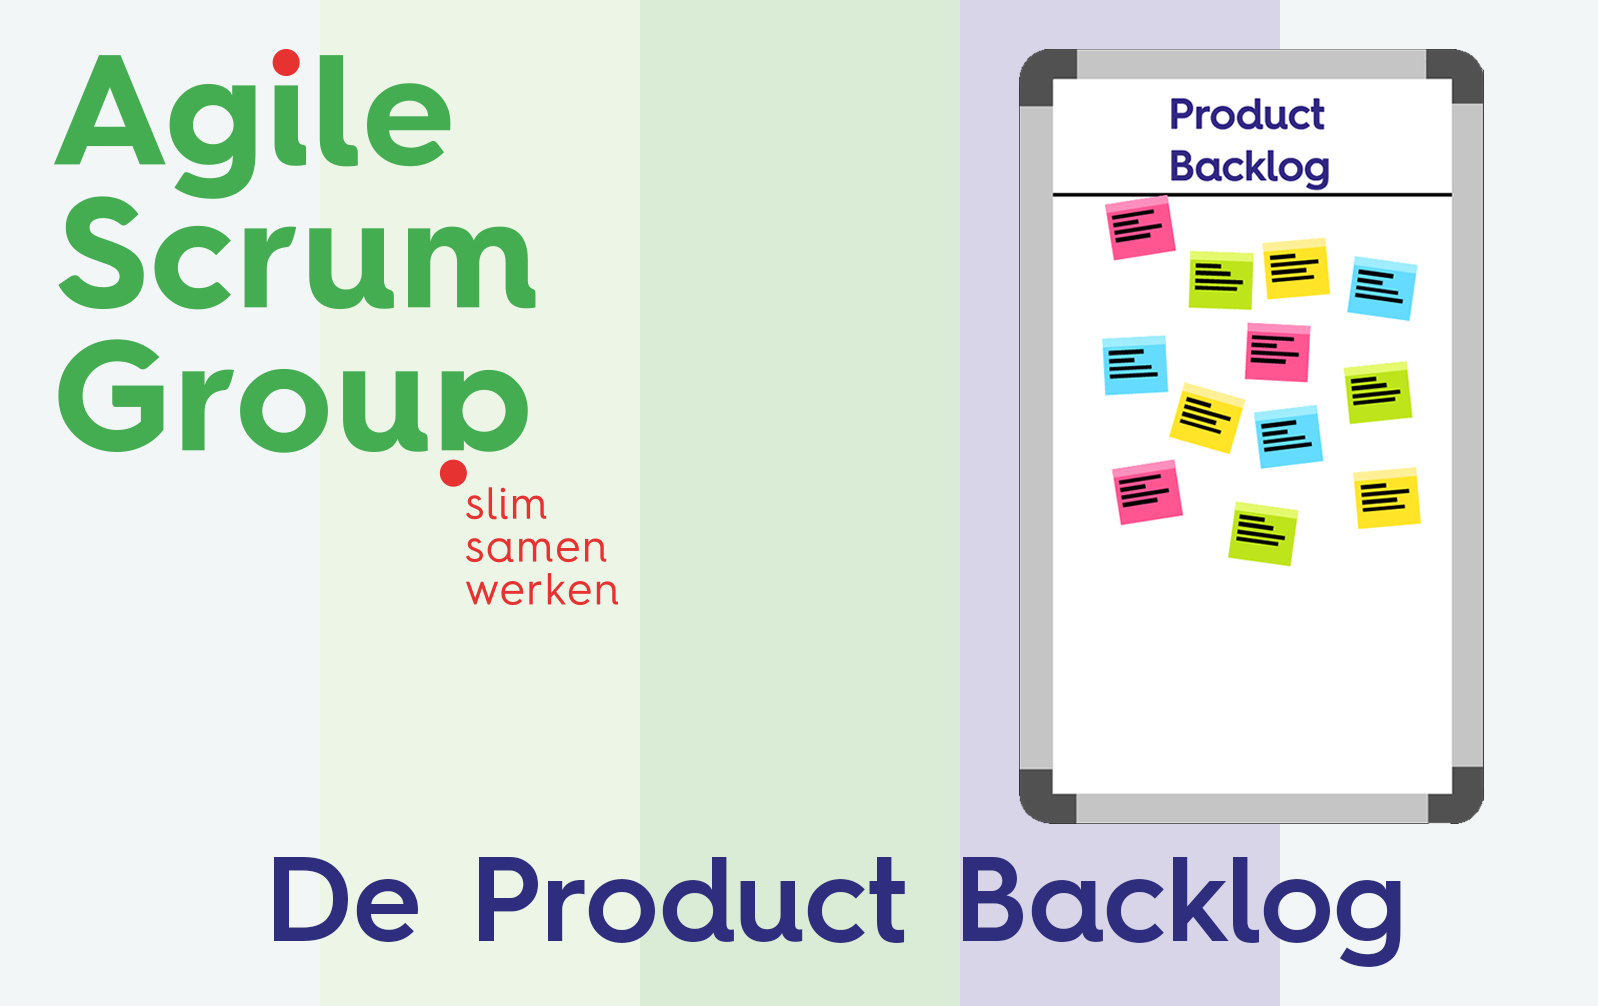 Definition of Ready voor de Product Backlog